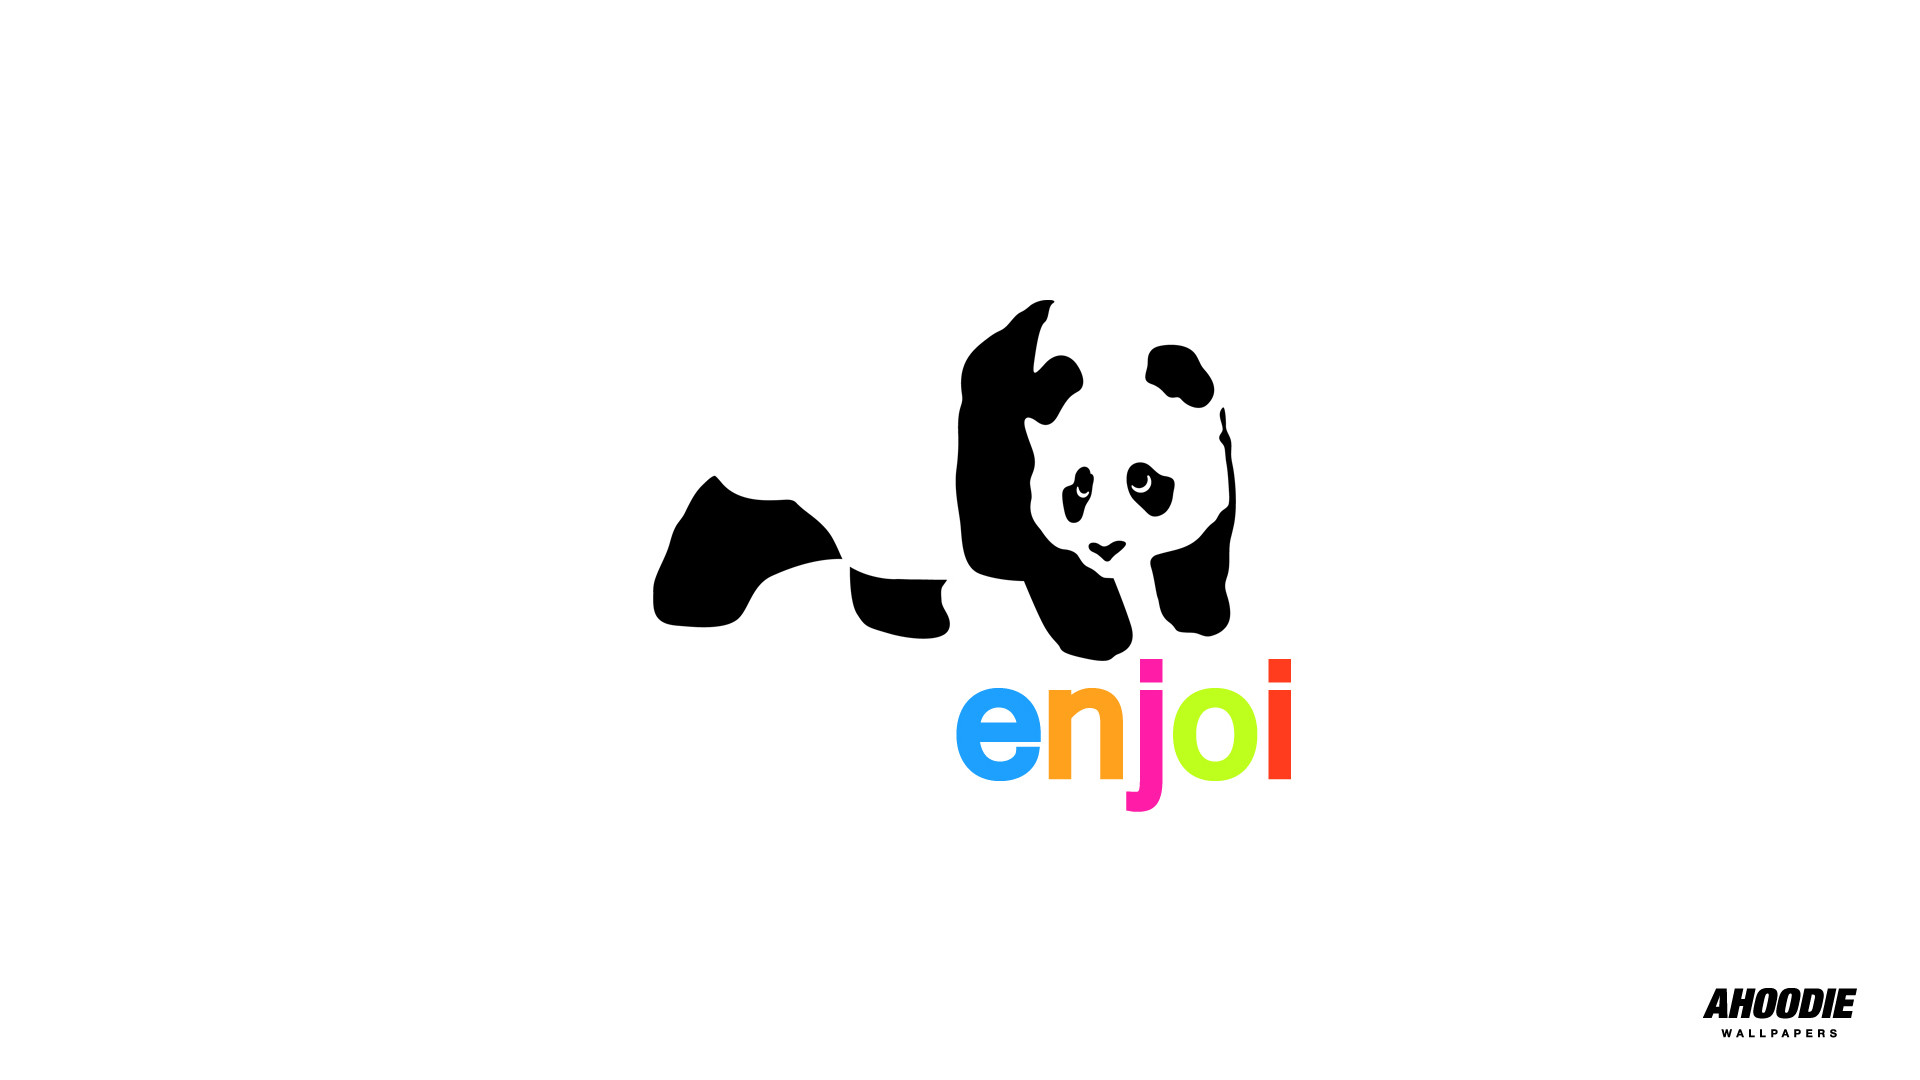 1920x1080 Enjoy, the company, not only uses the panda as a SYMBOL, like Apple. But  the symbol itself stripped away from the brand, is a perception and compos…